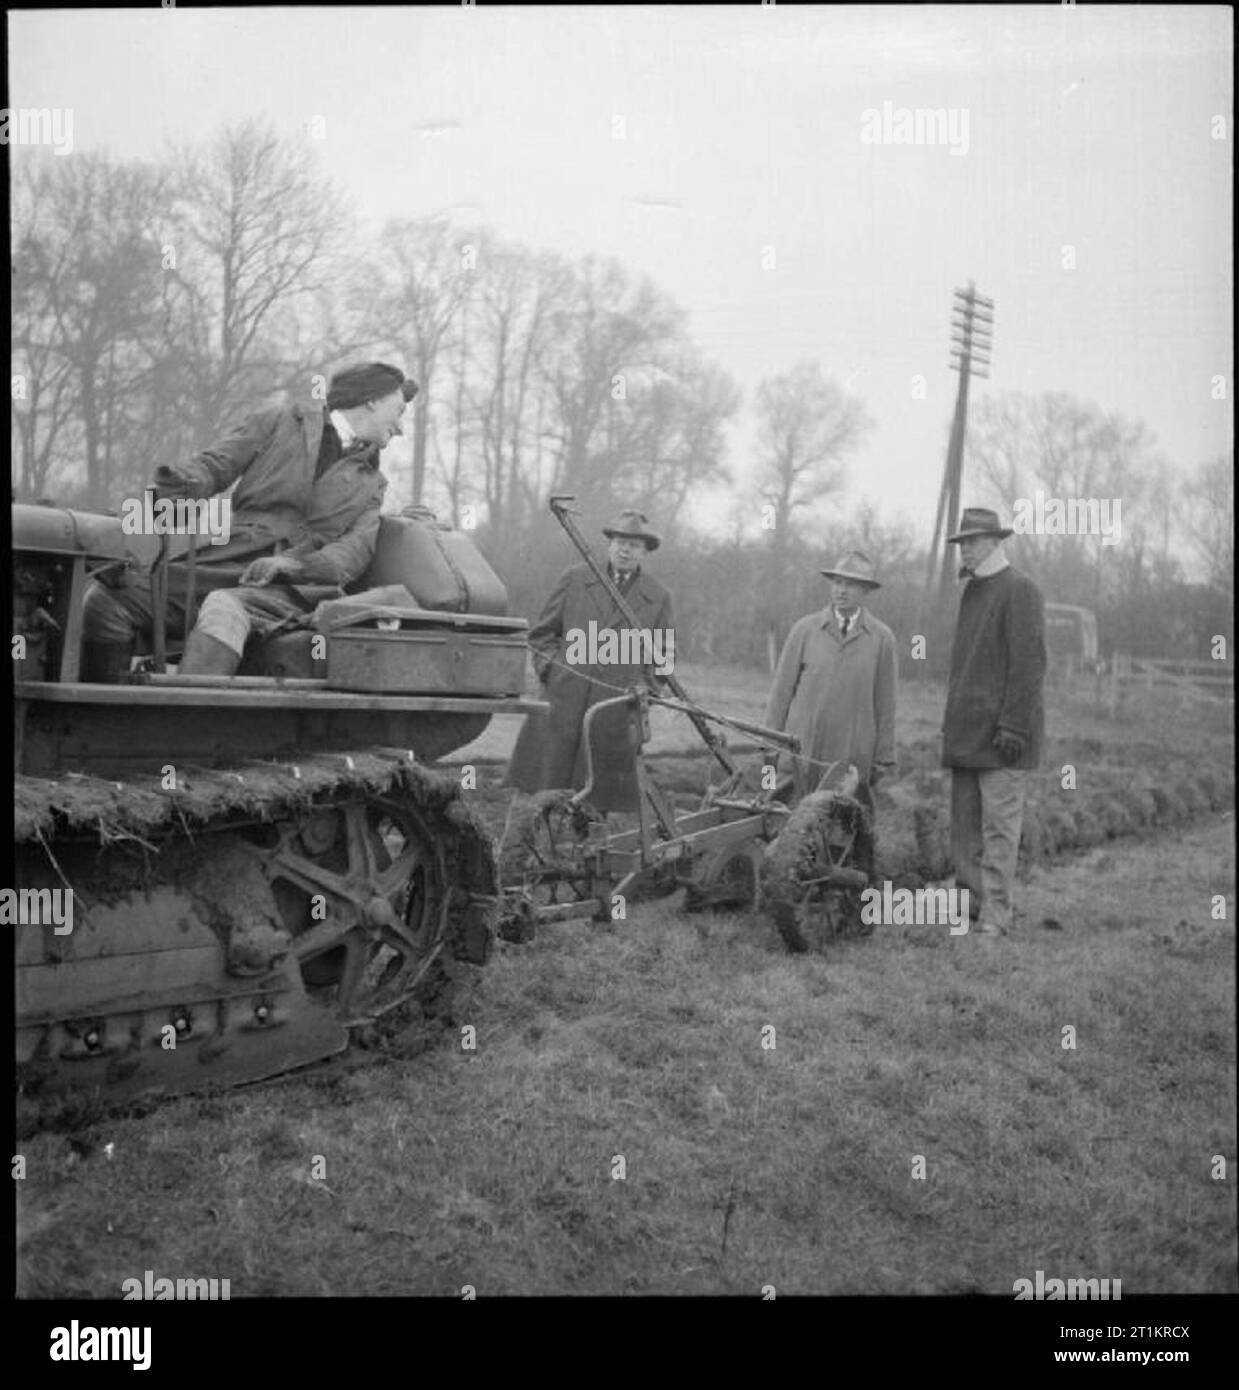 American Farmers Visit Britain- Lend-lease Equipment in Action, UK, 1943 Land Girl Kathleen Johnson demonstrates the ploughing capabilities of a Caterpillar D2 tractor and Oliver deep digger plough to Mr Heline, Mr Howard and Mr Robinson on grassland, somewhere in Buckinghamshire. The plough is from the Oliver Farm Equipment Company of Chicago. Stock Photo